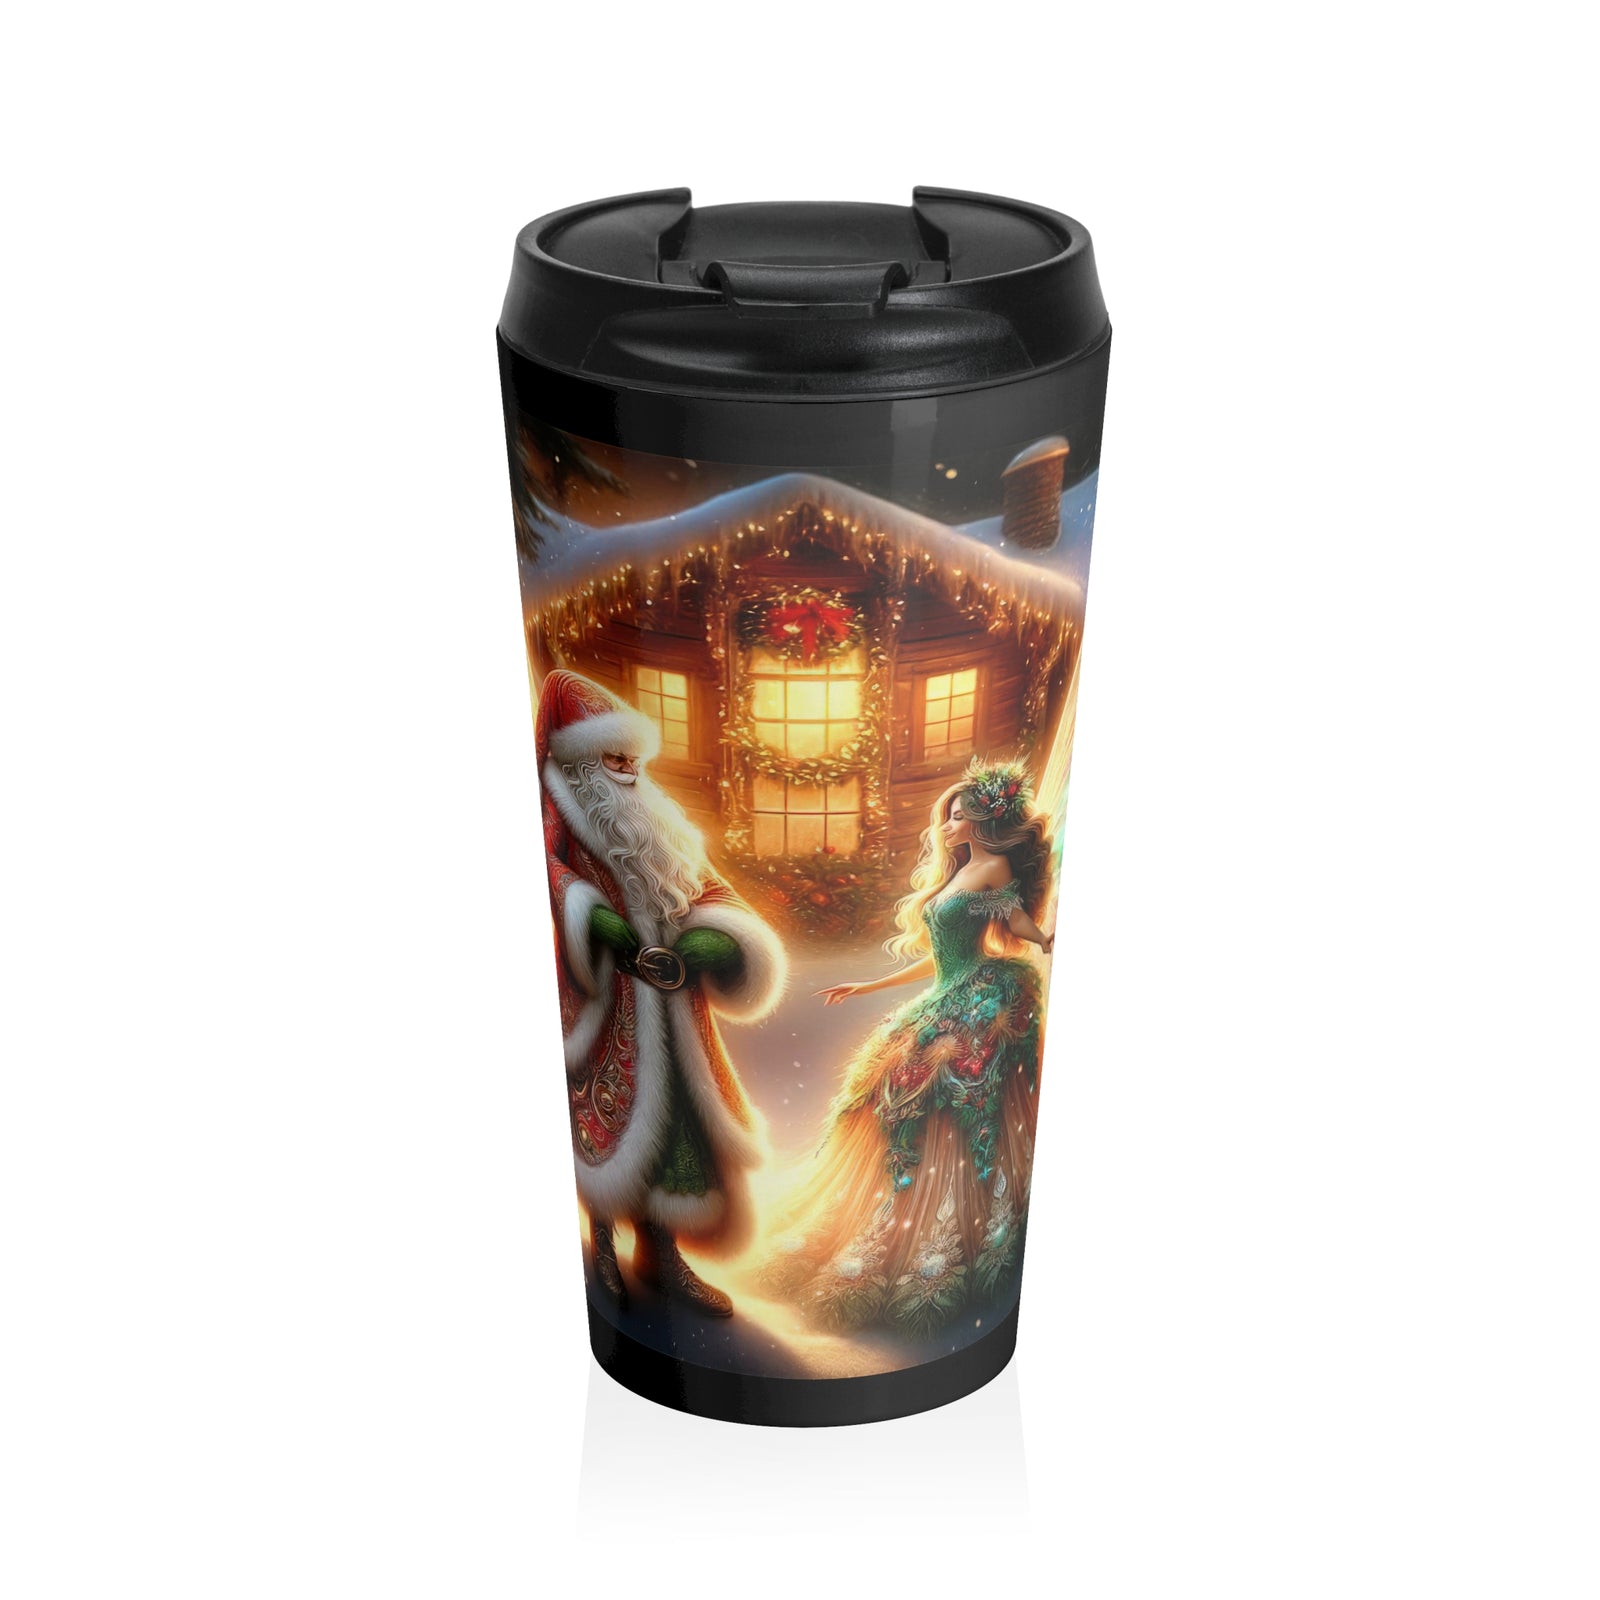 A Fairytale of Frost and Glitter Travel Mug